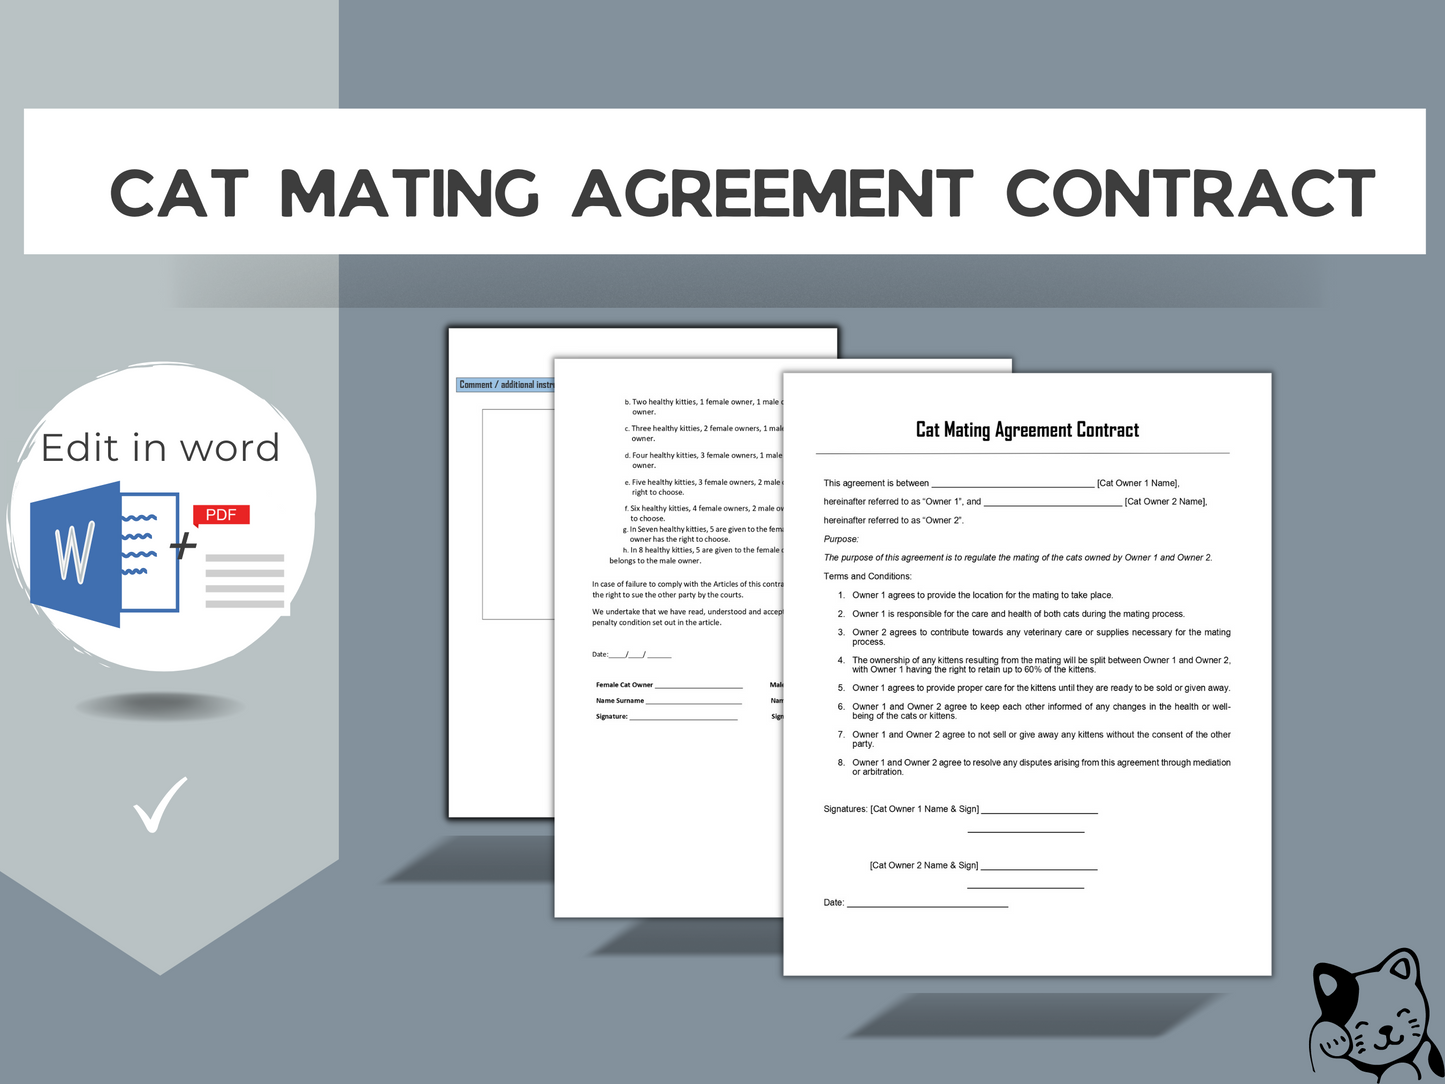 Cat Mating Contract | Editable in Word & PDF | Cat Mating Agreement Contract | Cat Breeder Agreement |